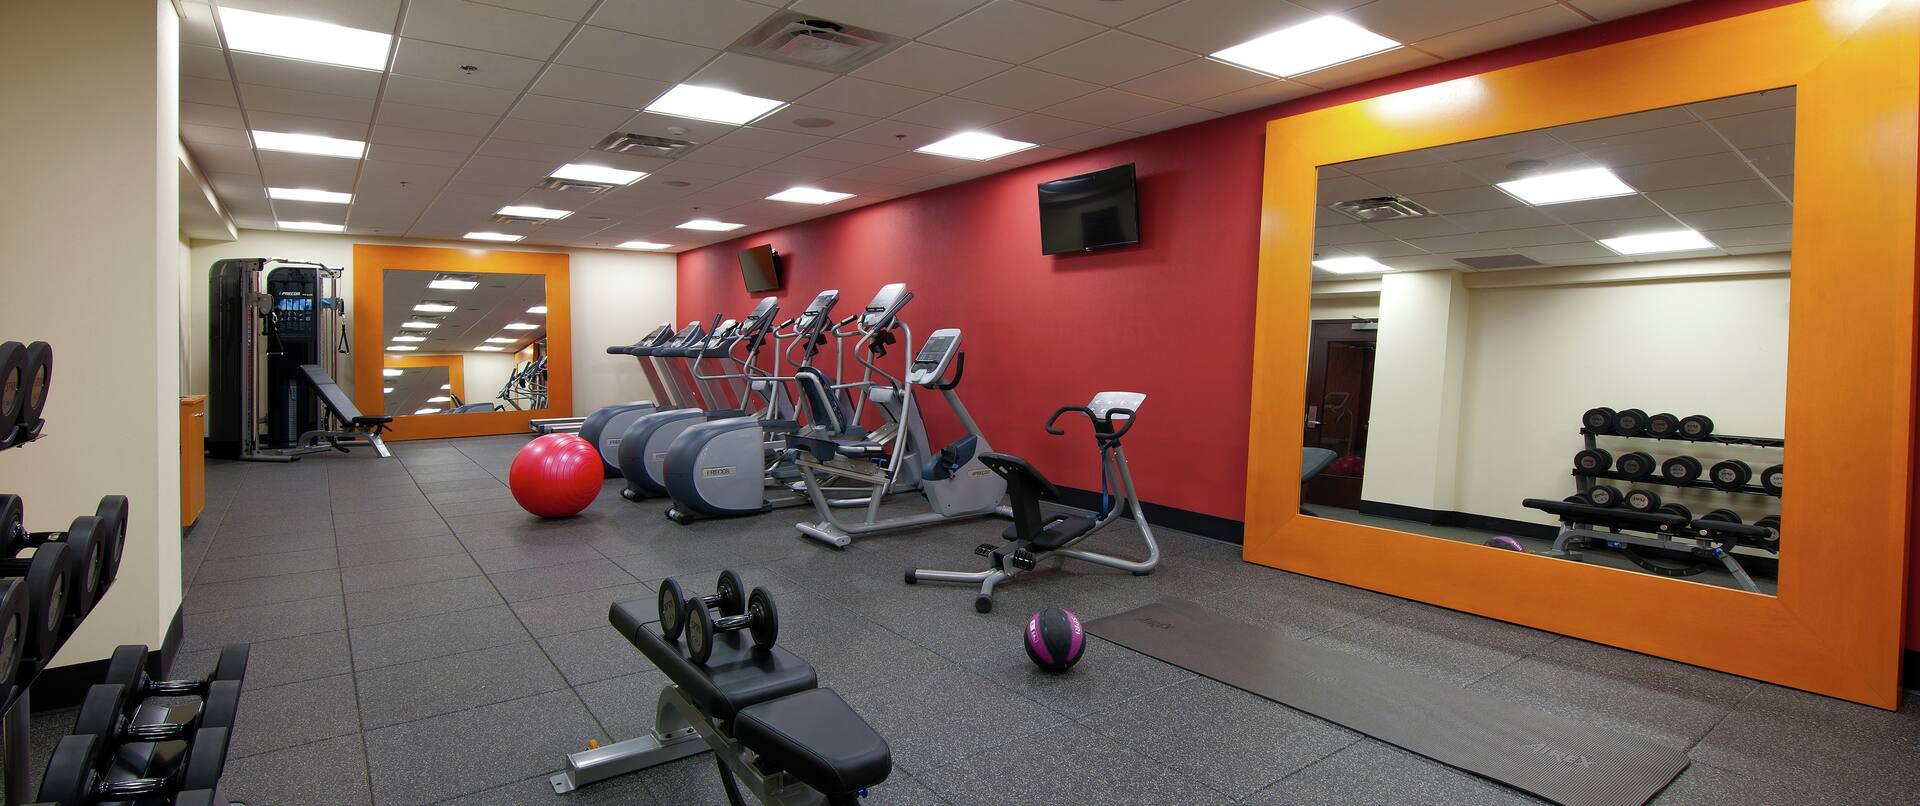 Fitness Center With Weight Machine